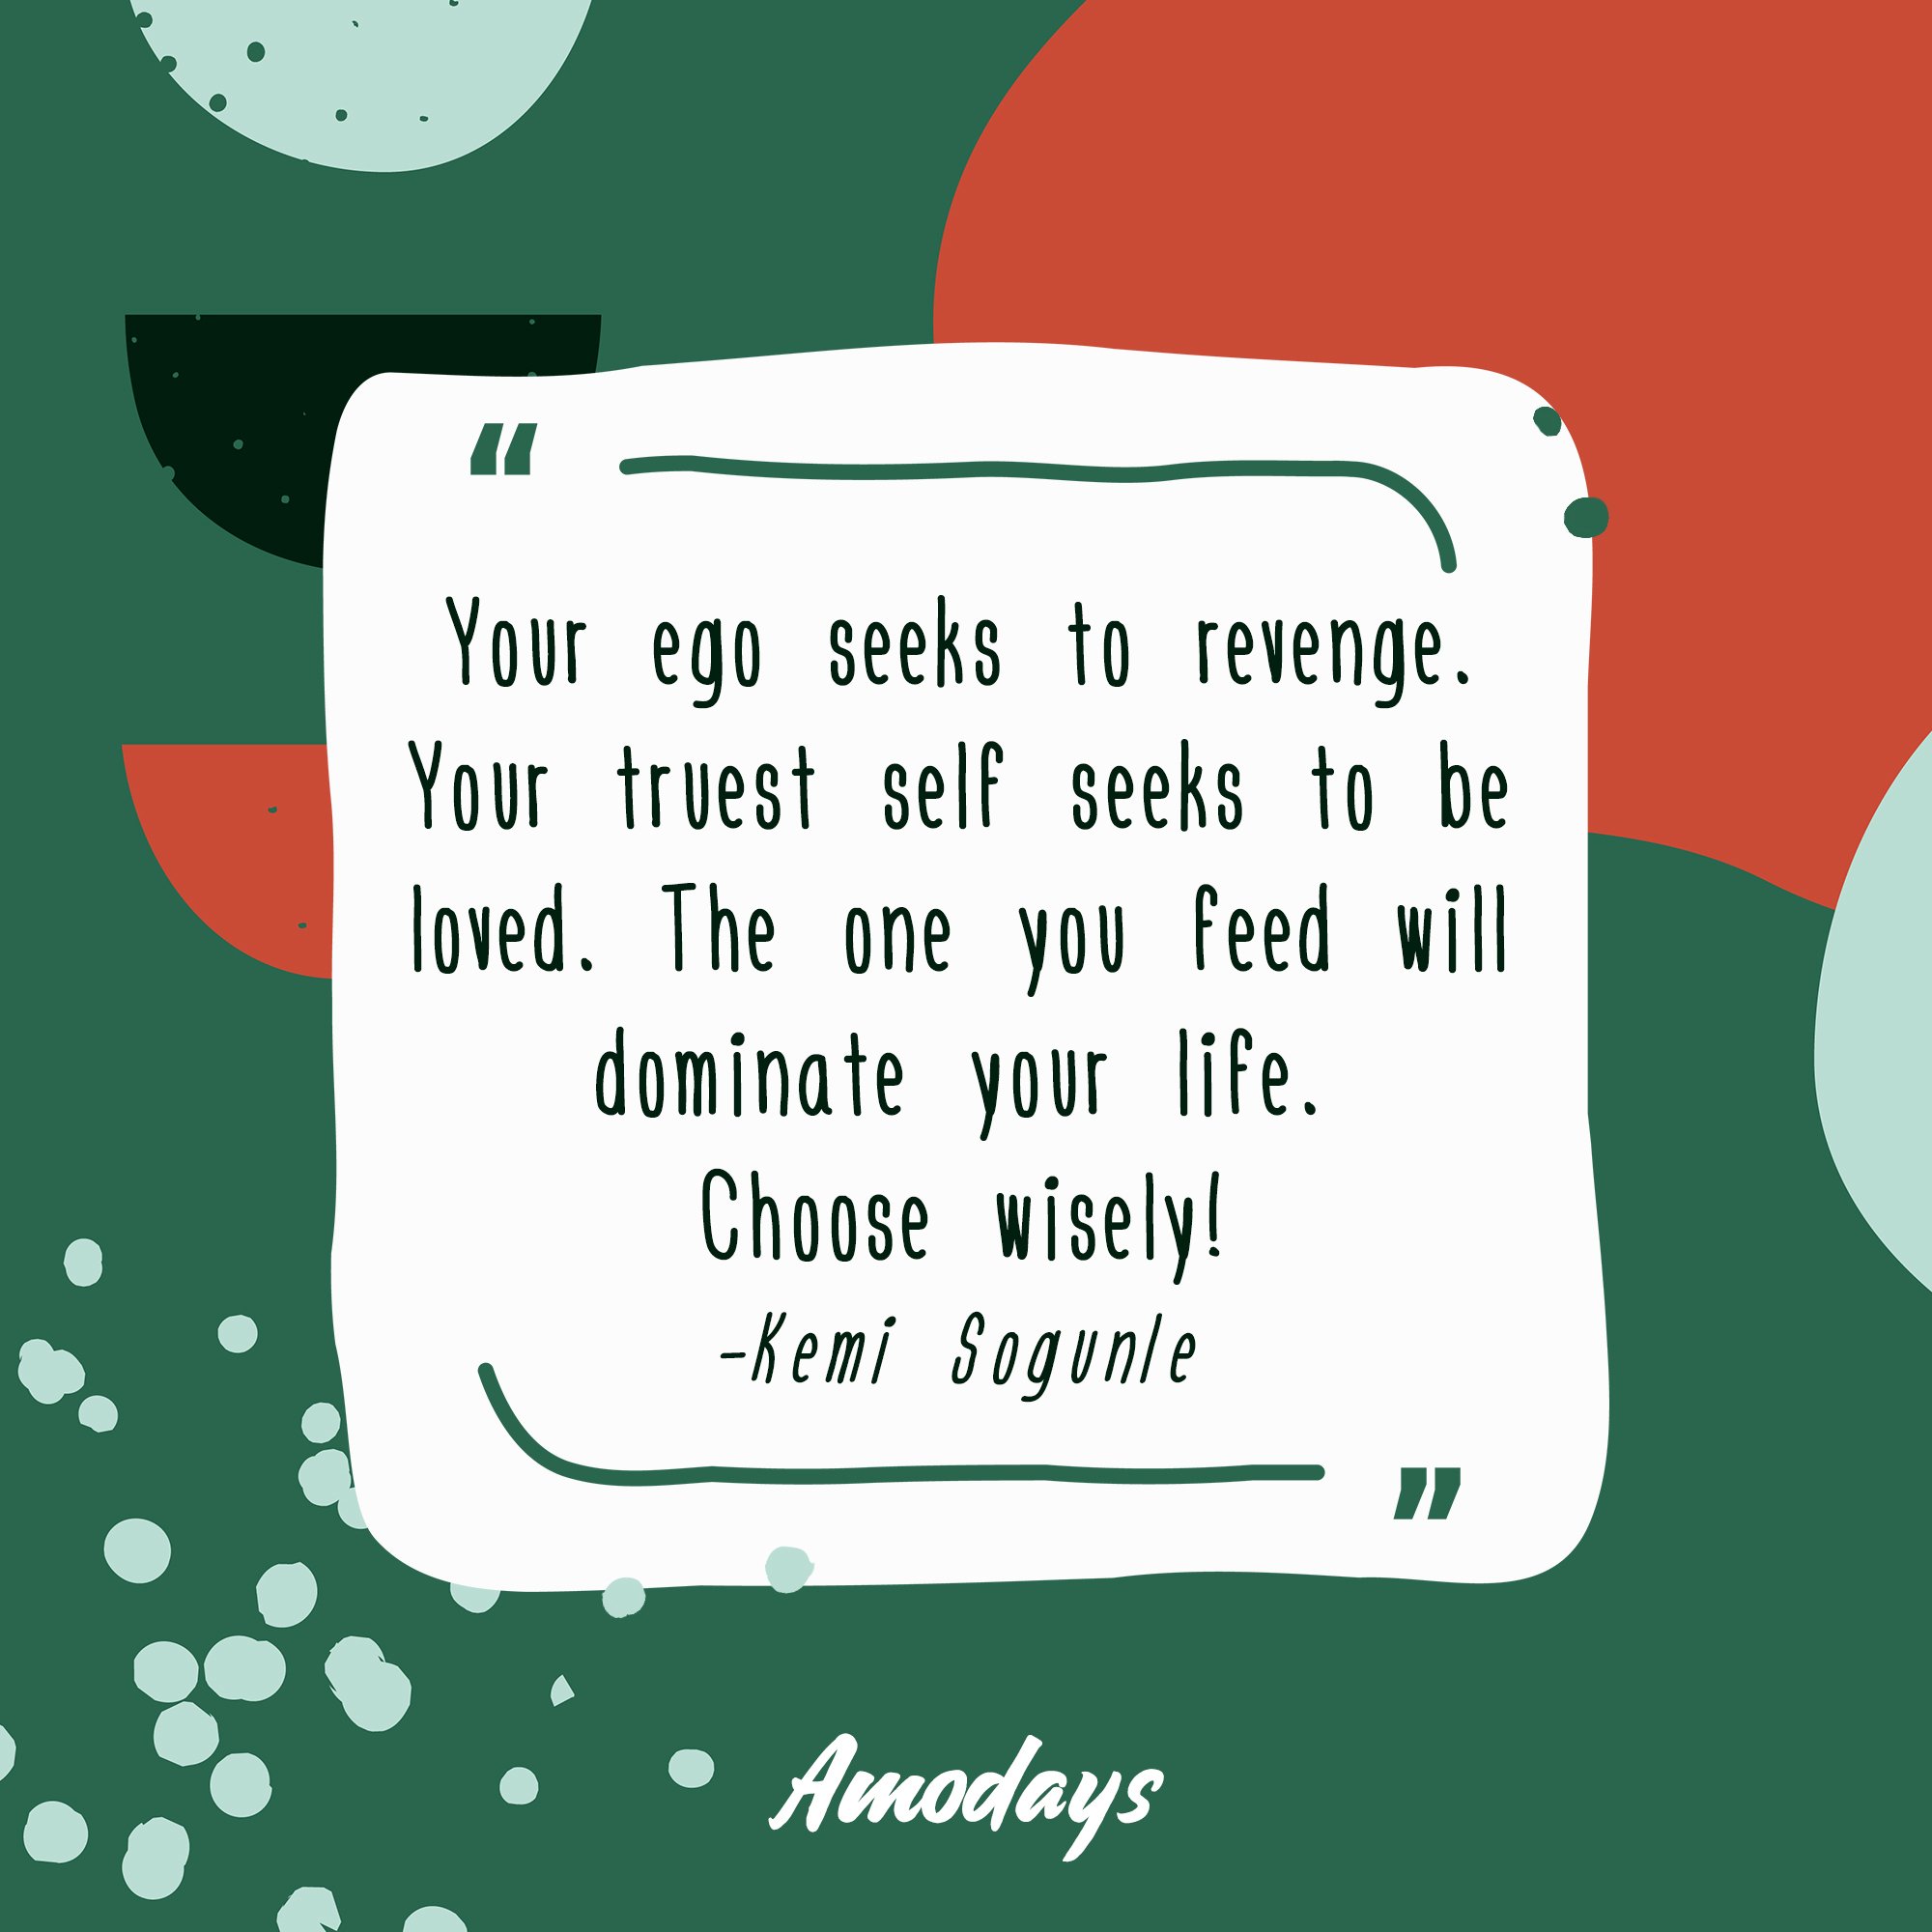 Kemi Sogunle's quote "Your ego seeks to revenge. Your truest self seeks to be loved. The one you feed will dominate your life. Choose wisely!" | Image: AmoDays